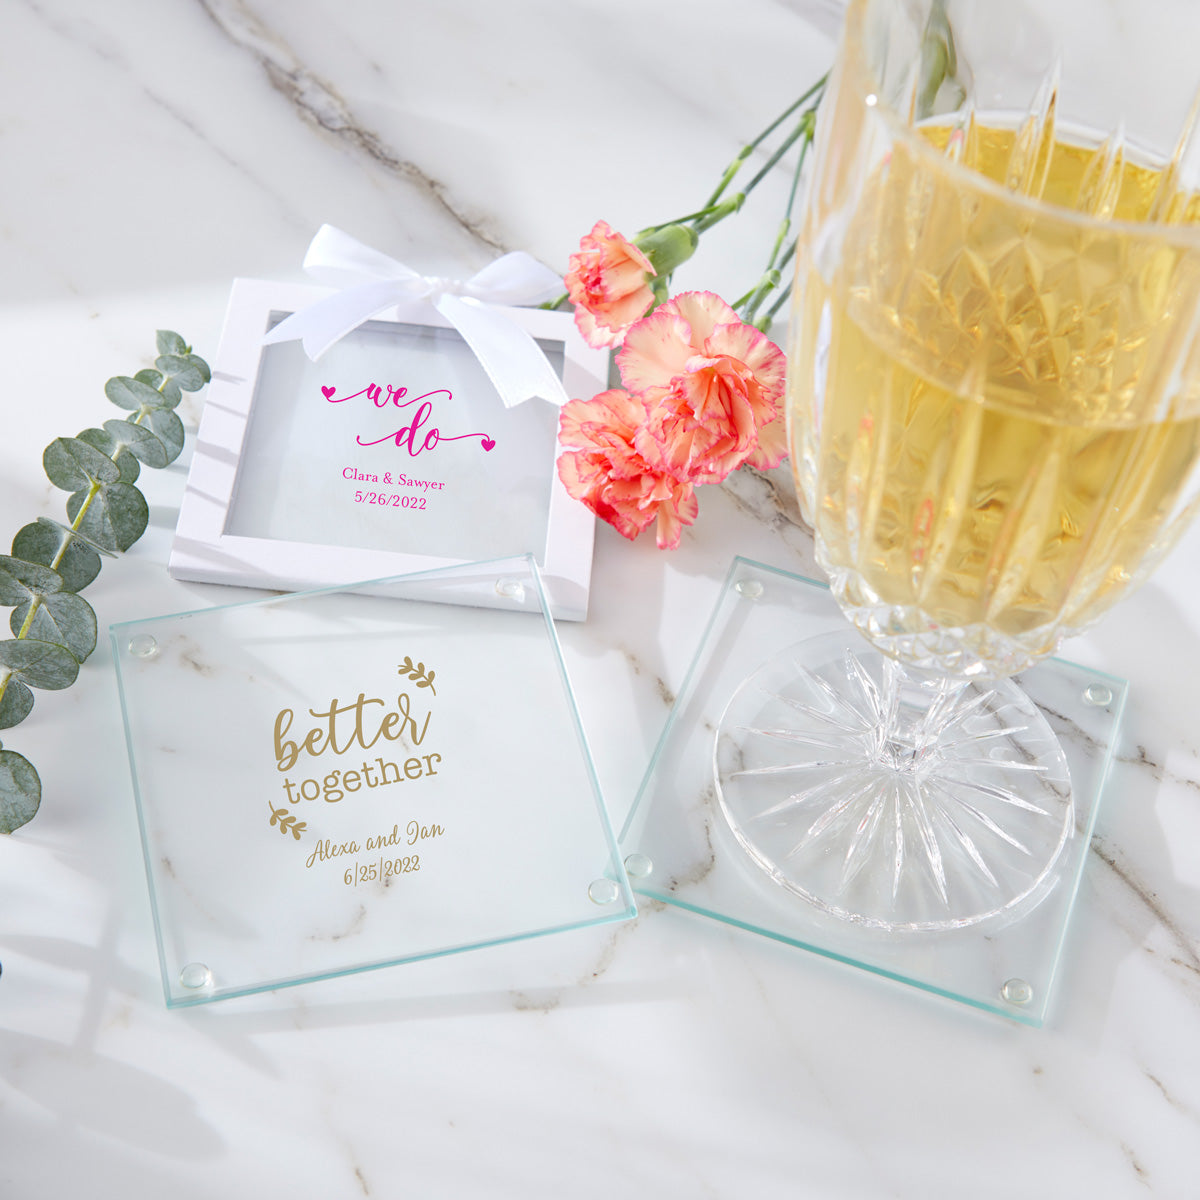 Personalized Glass Coaster (Set of 12) - Main Image | My Wedding Favors